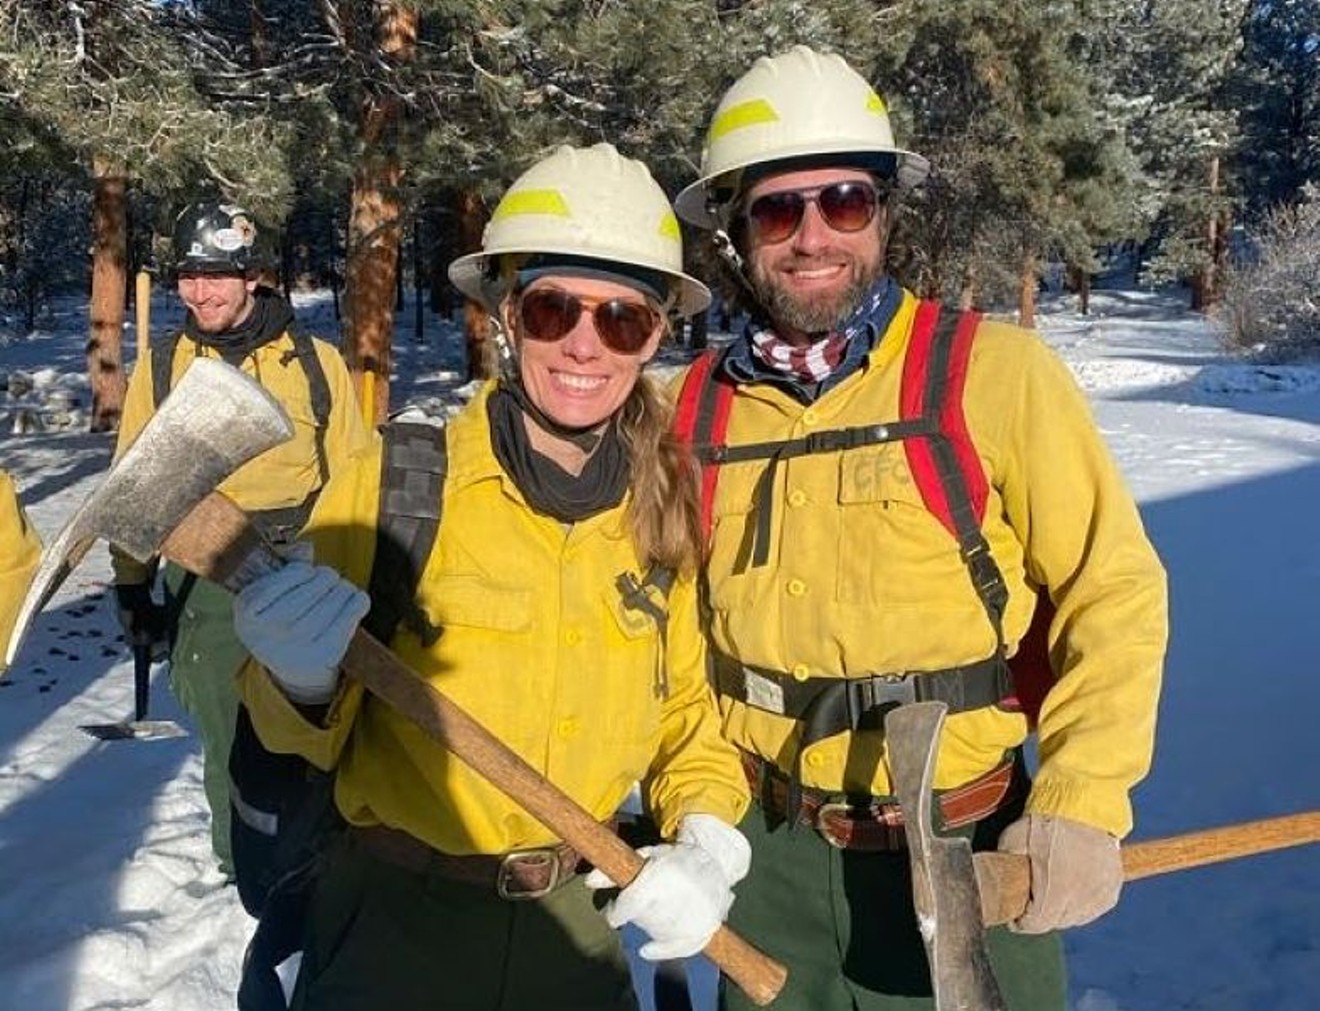 Corinne Hancock and Zach Snavely at Colorado Firecamp.